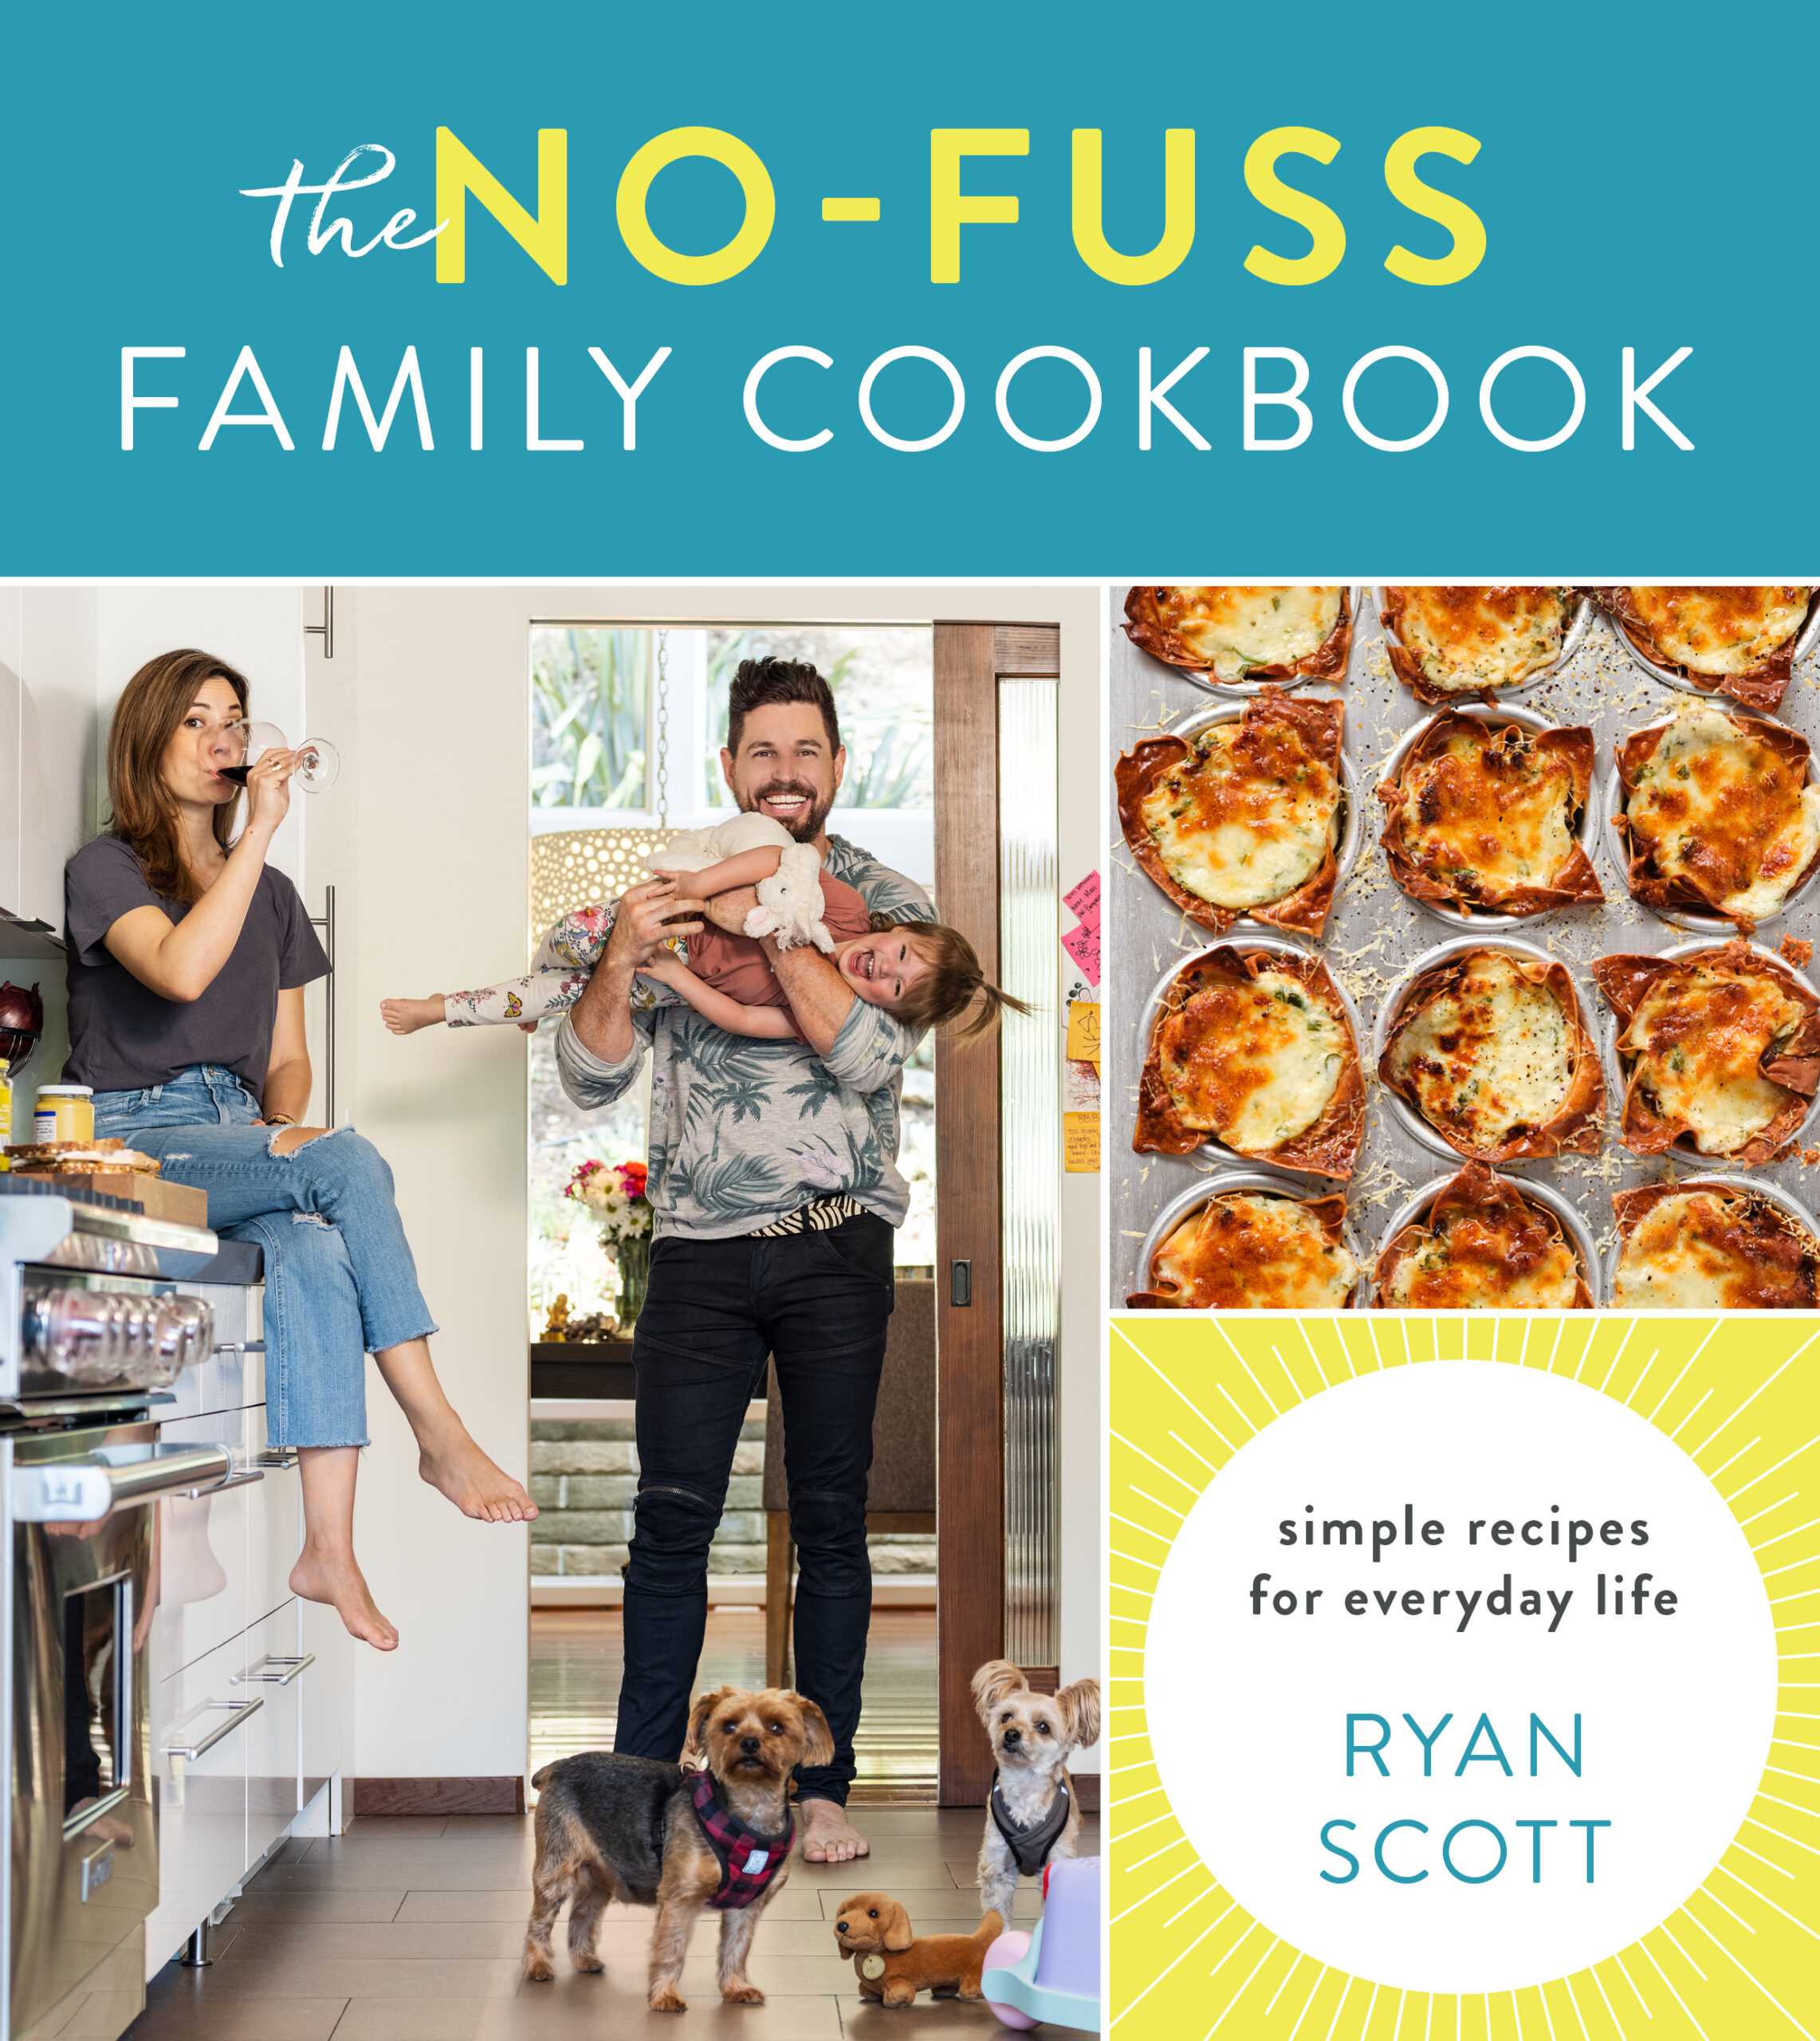 Buy the The No-Fuss Family Cookbook cookbook